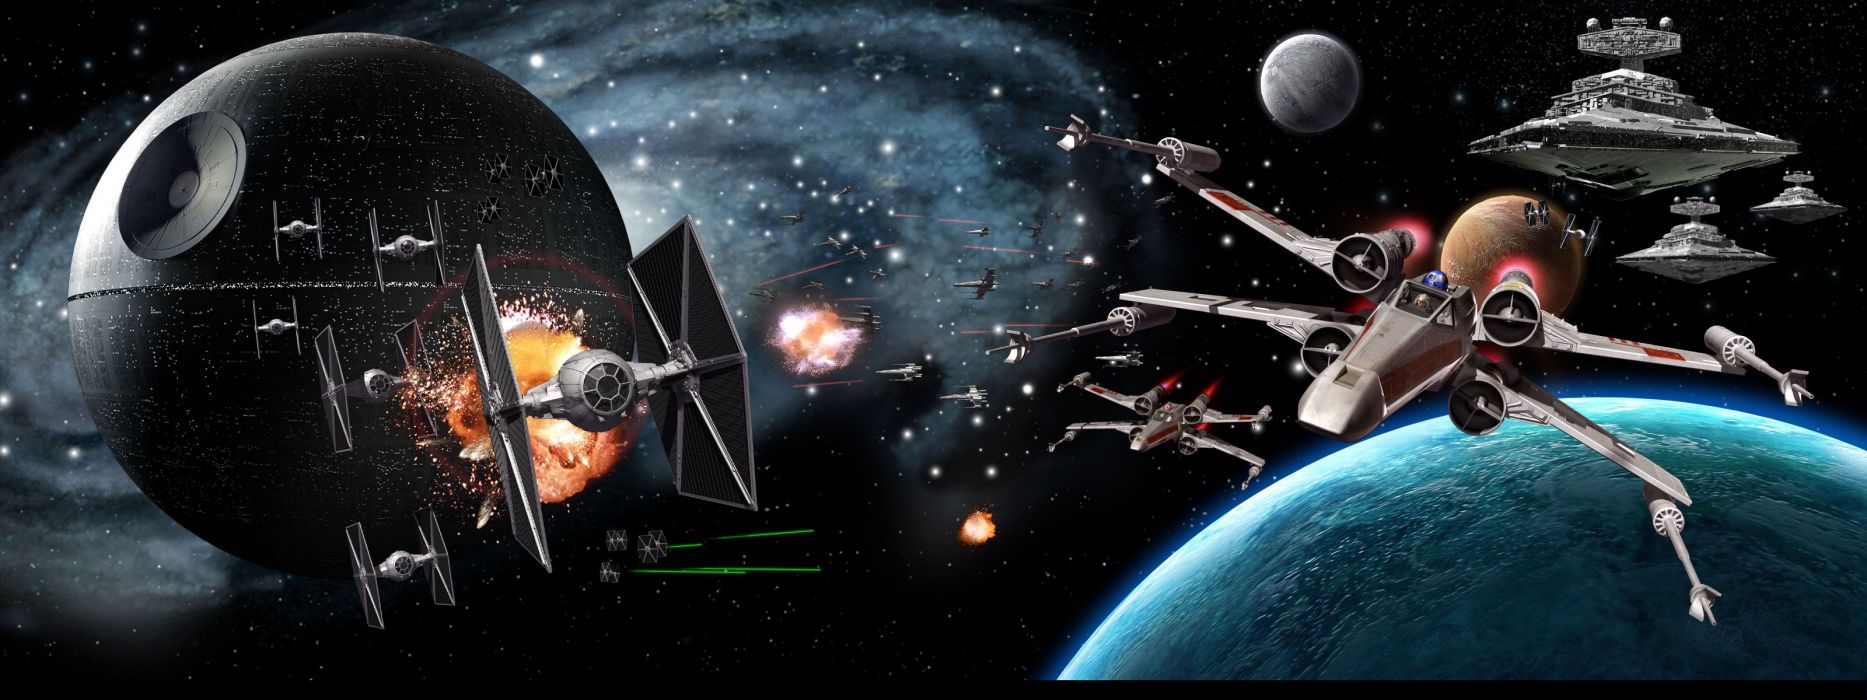 Star wars Multi Monitor sci fi science battle death star outer space vehicles spaceships spacecrafts wallpaperx1200